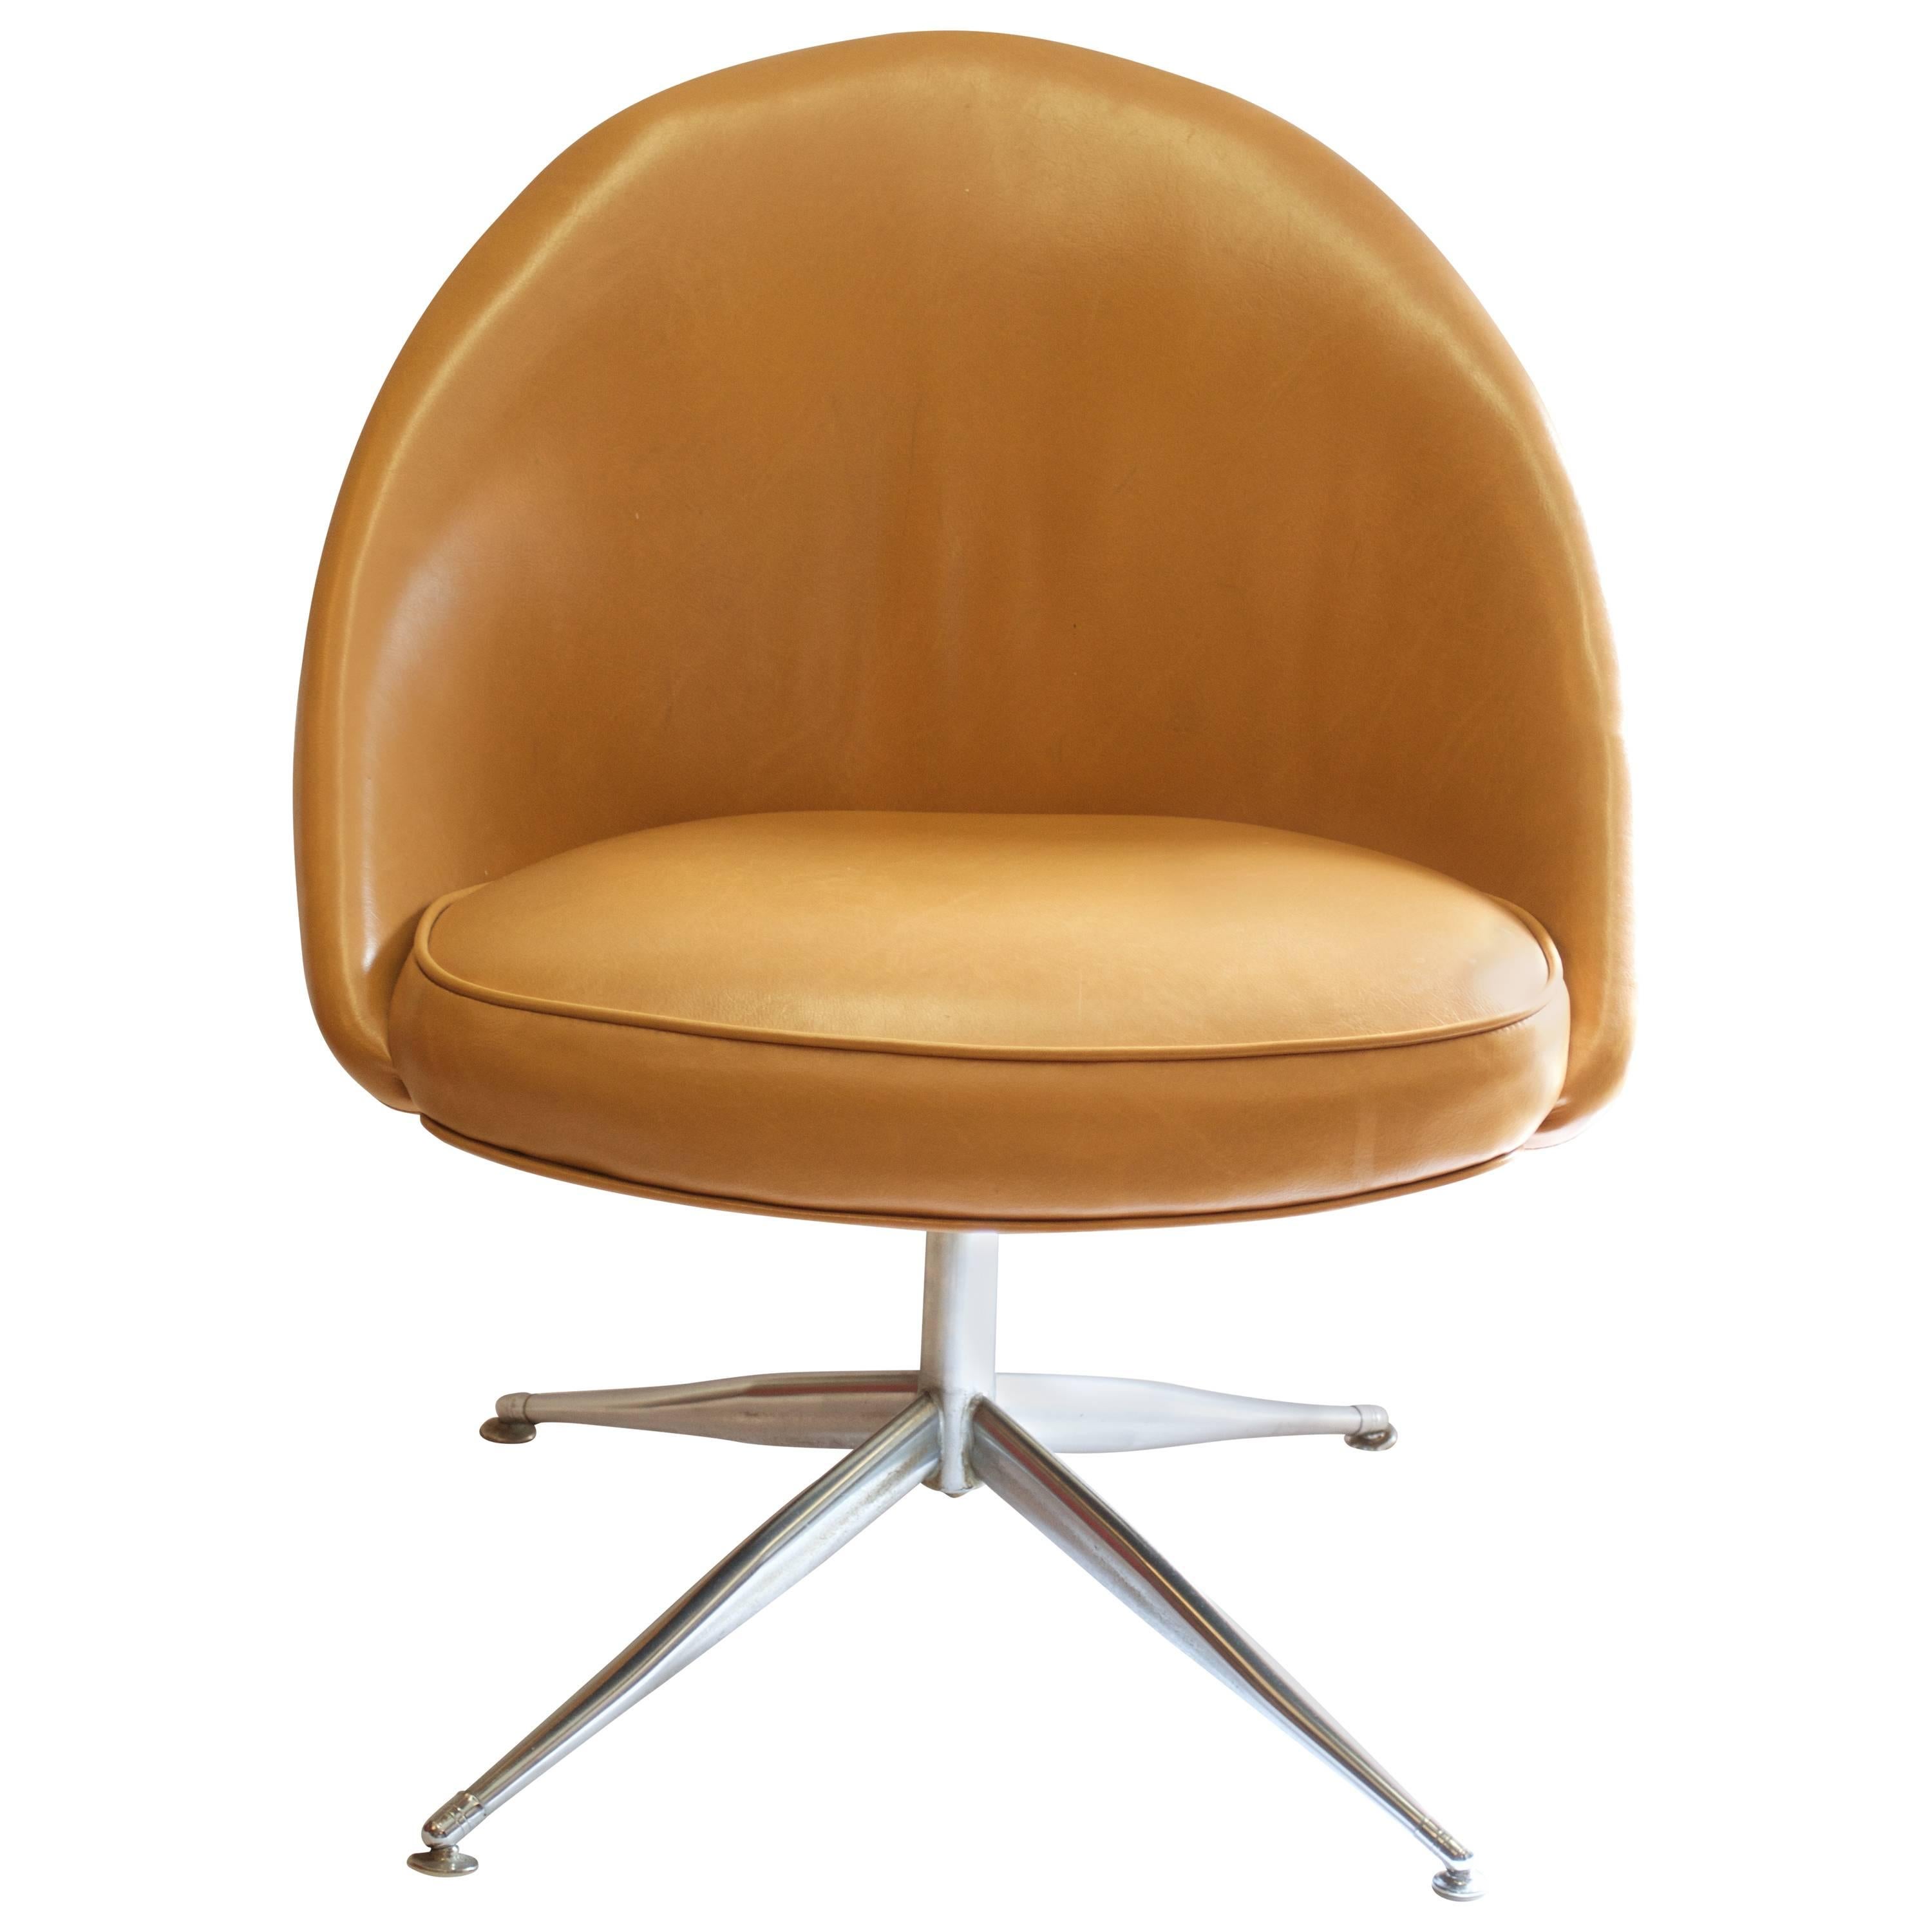 Vanity Slipper Chair with Chrome Base in Camel Leather